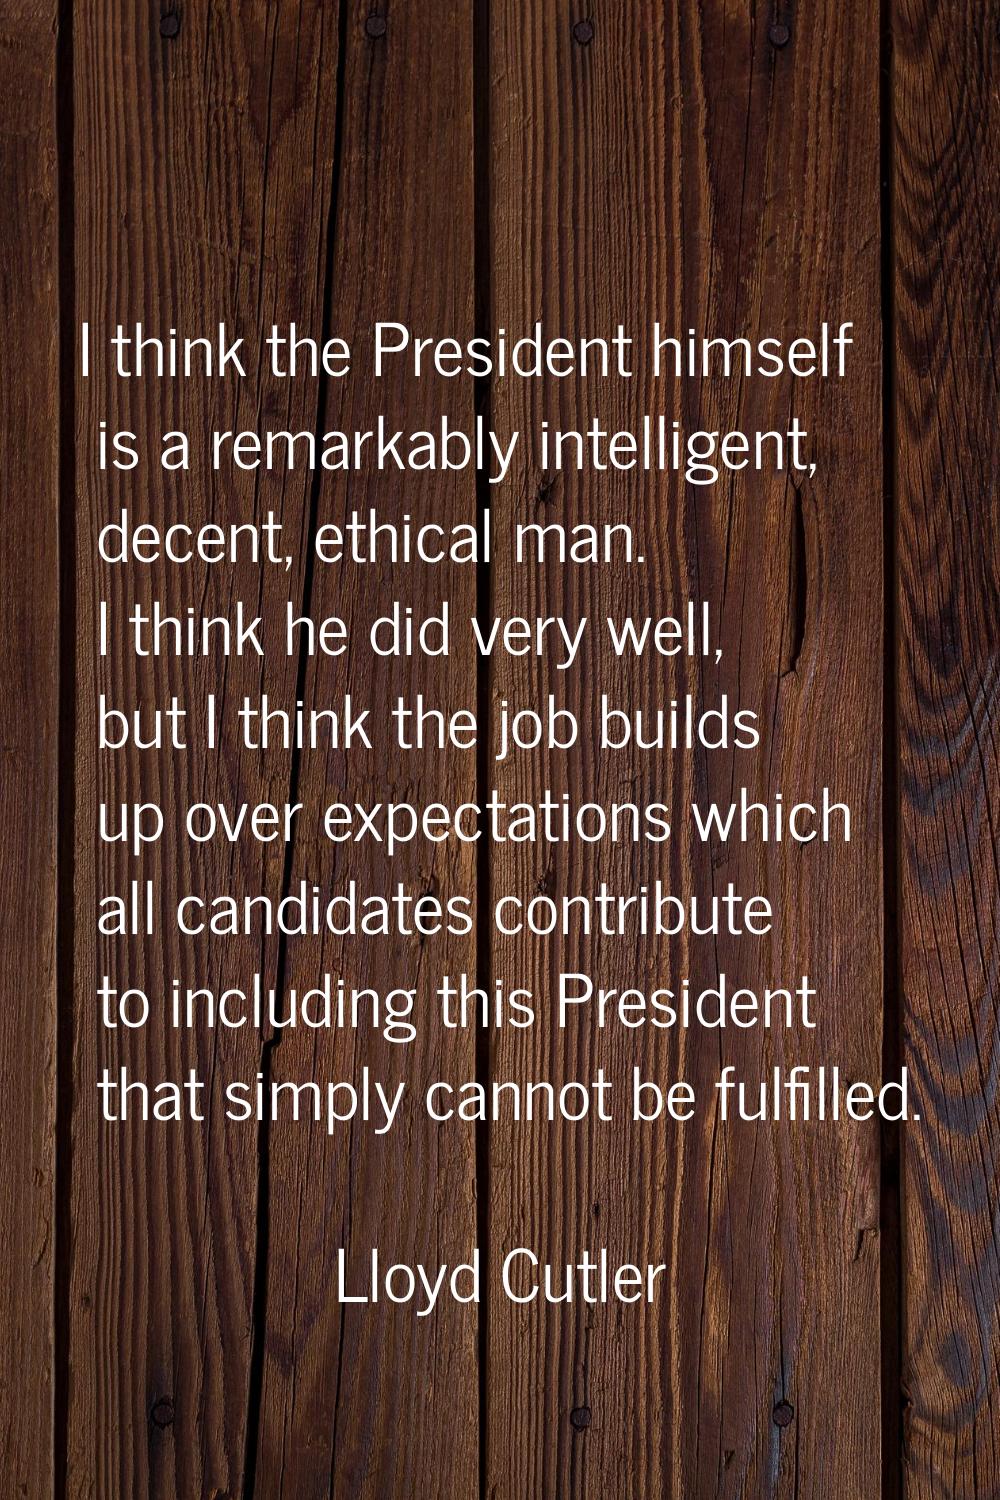 I think the President himself is a remarkably intelligent, decent, ethical man. I think he did very